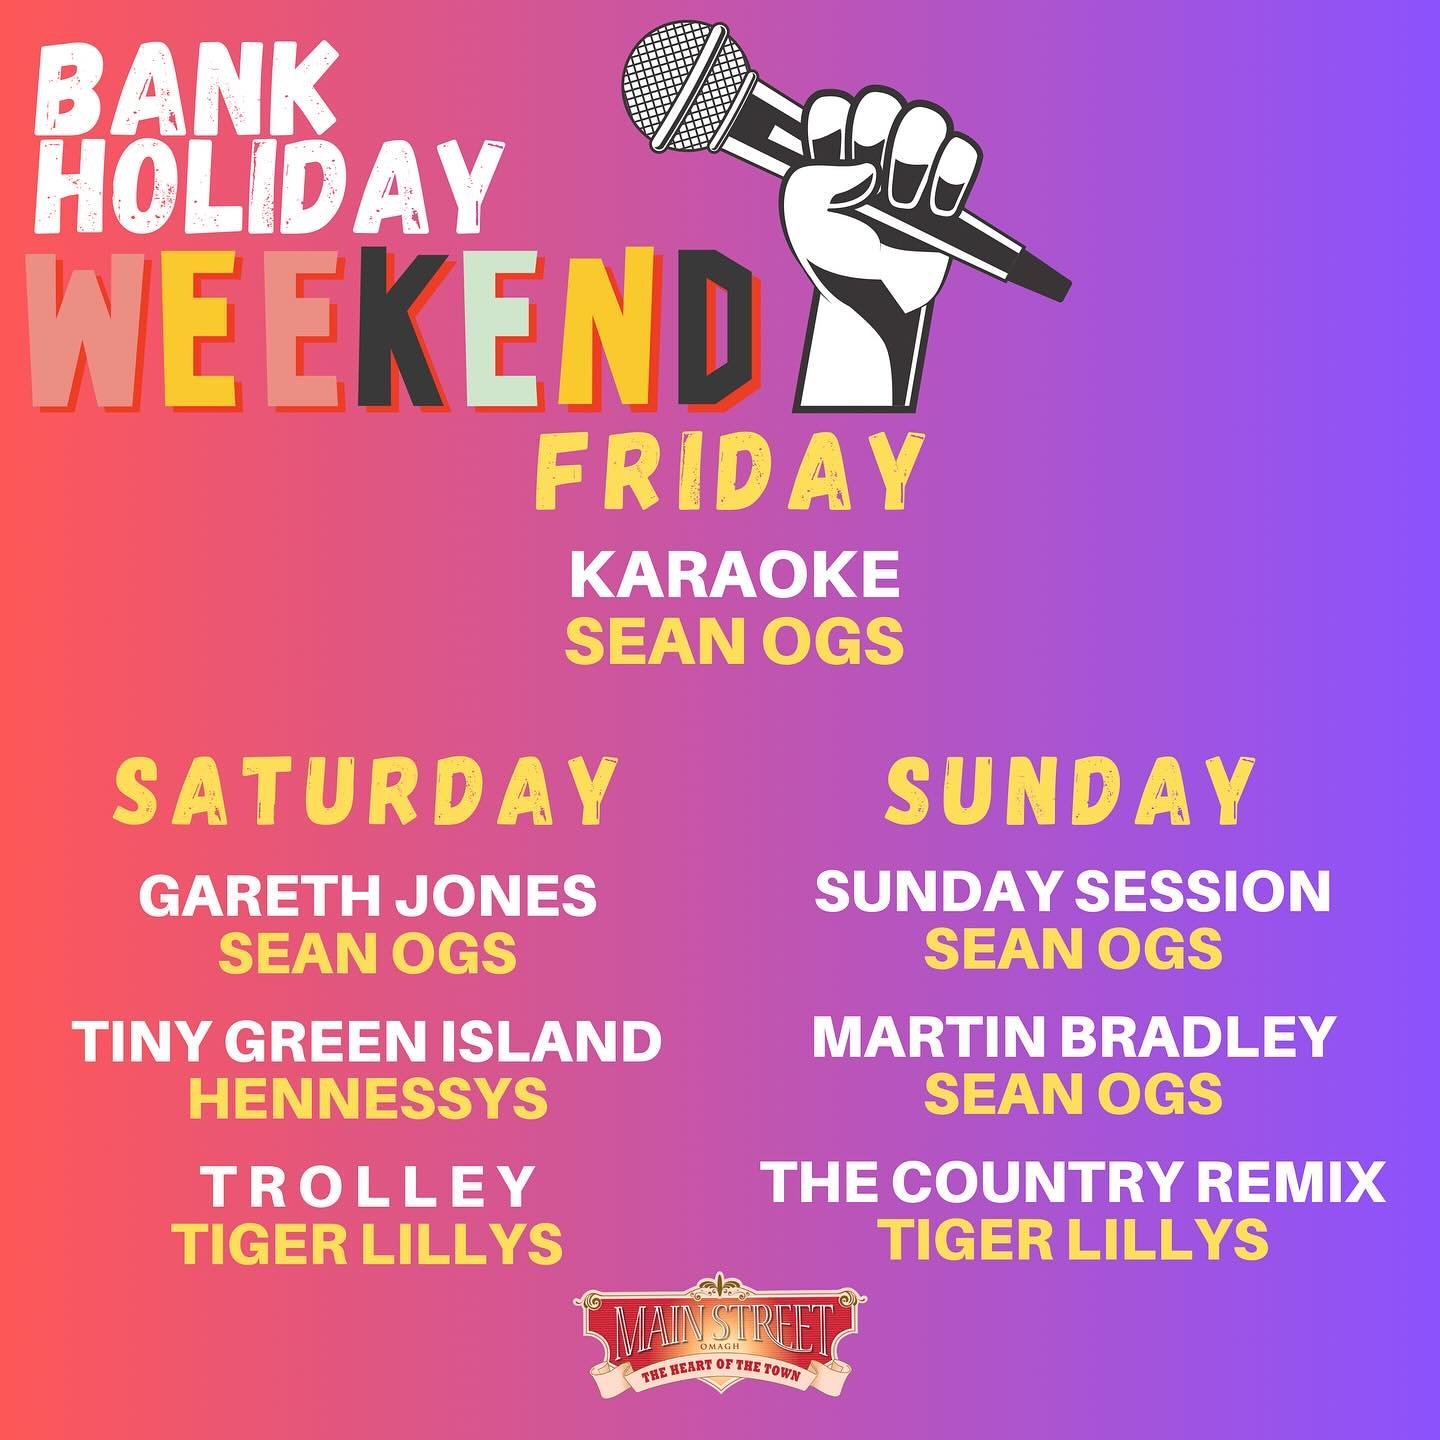 BANK HOLIDAY WEEKEND
We have you covered on MAINSTREET
Live Music all weekend 🎶 
#livemusic #bankholiday #weekend